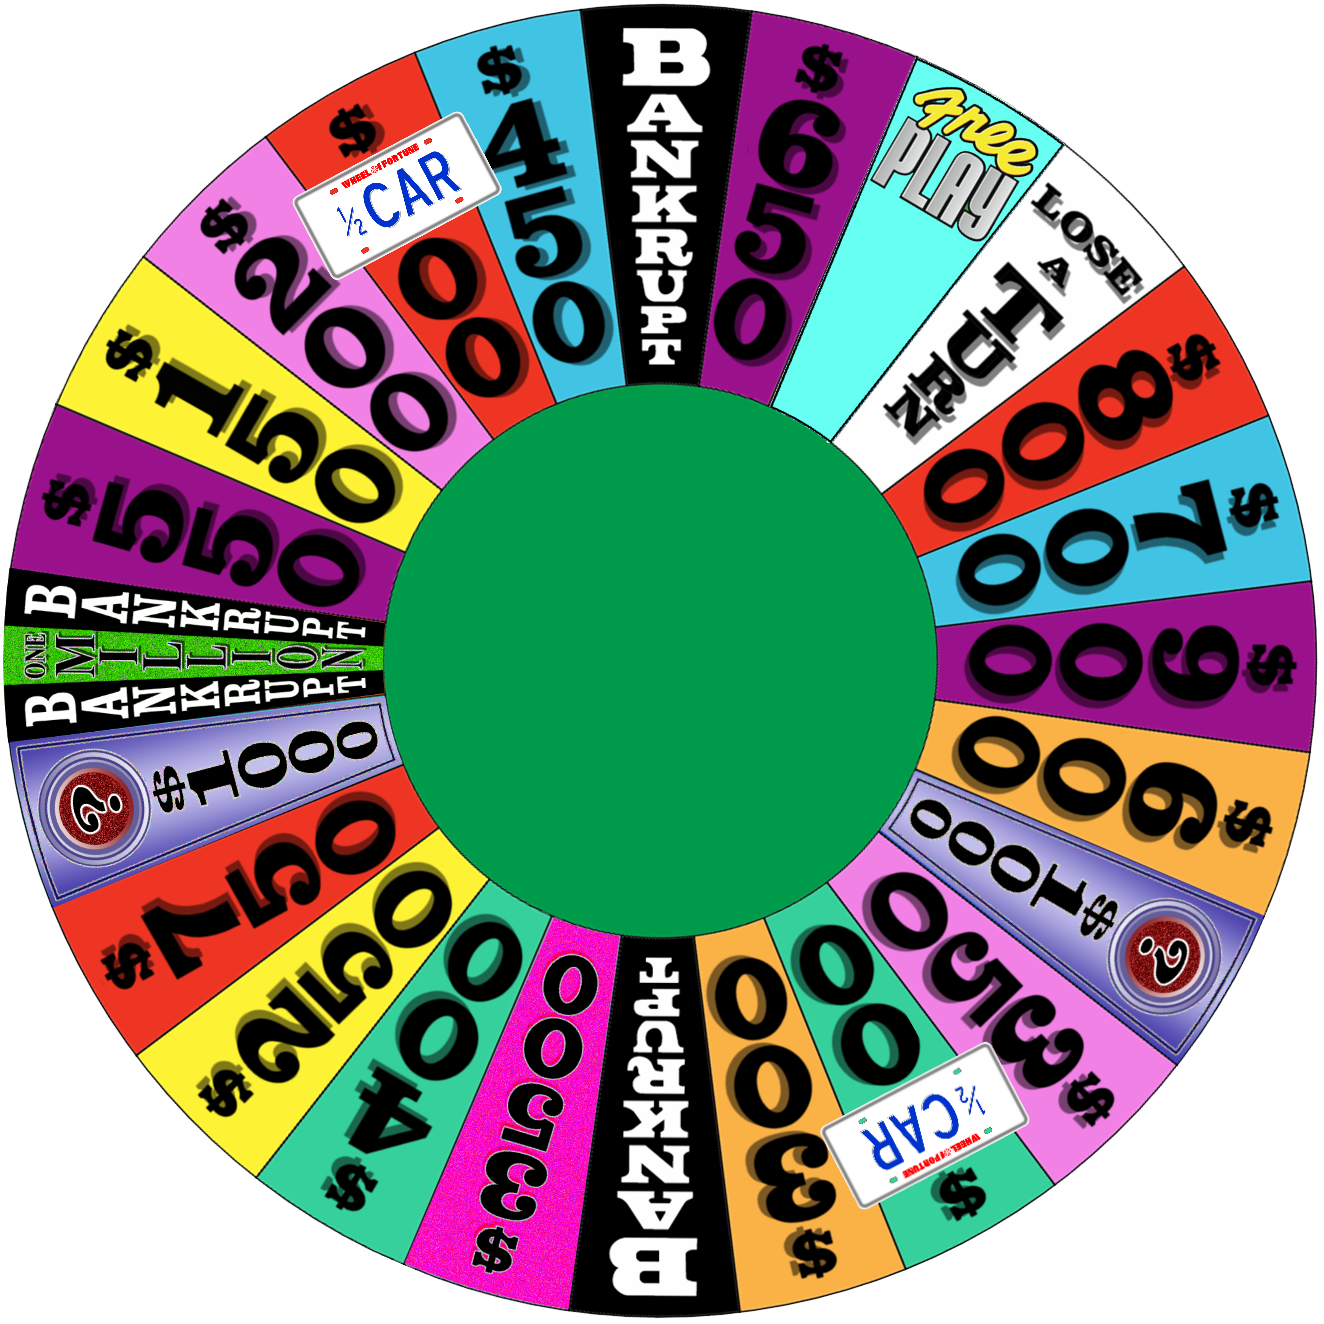 Gary's Wheel of Fortune (MYSTERY ROUND) by LeafMan813 on DeviantArt